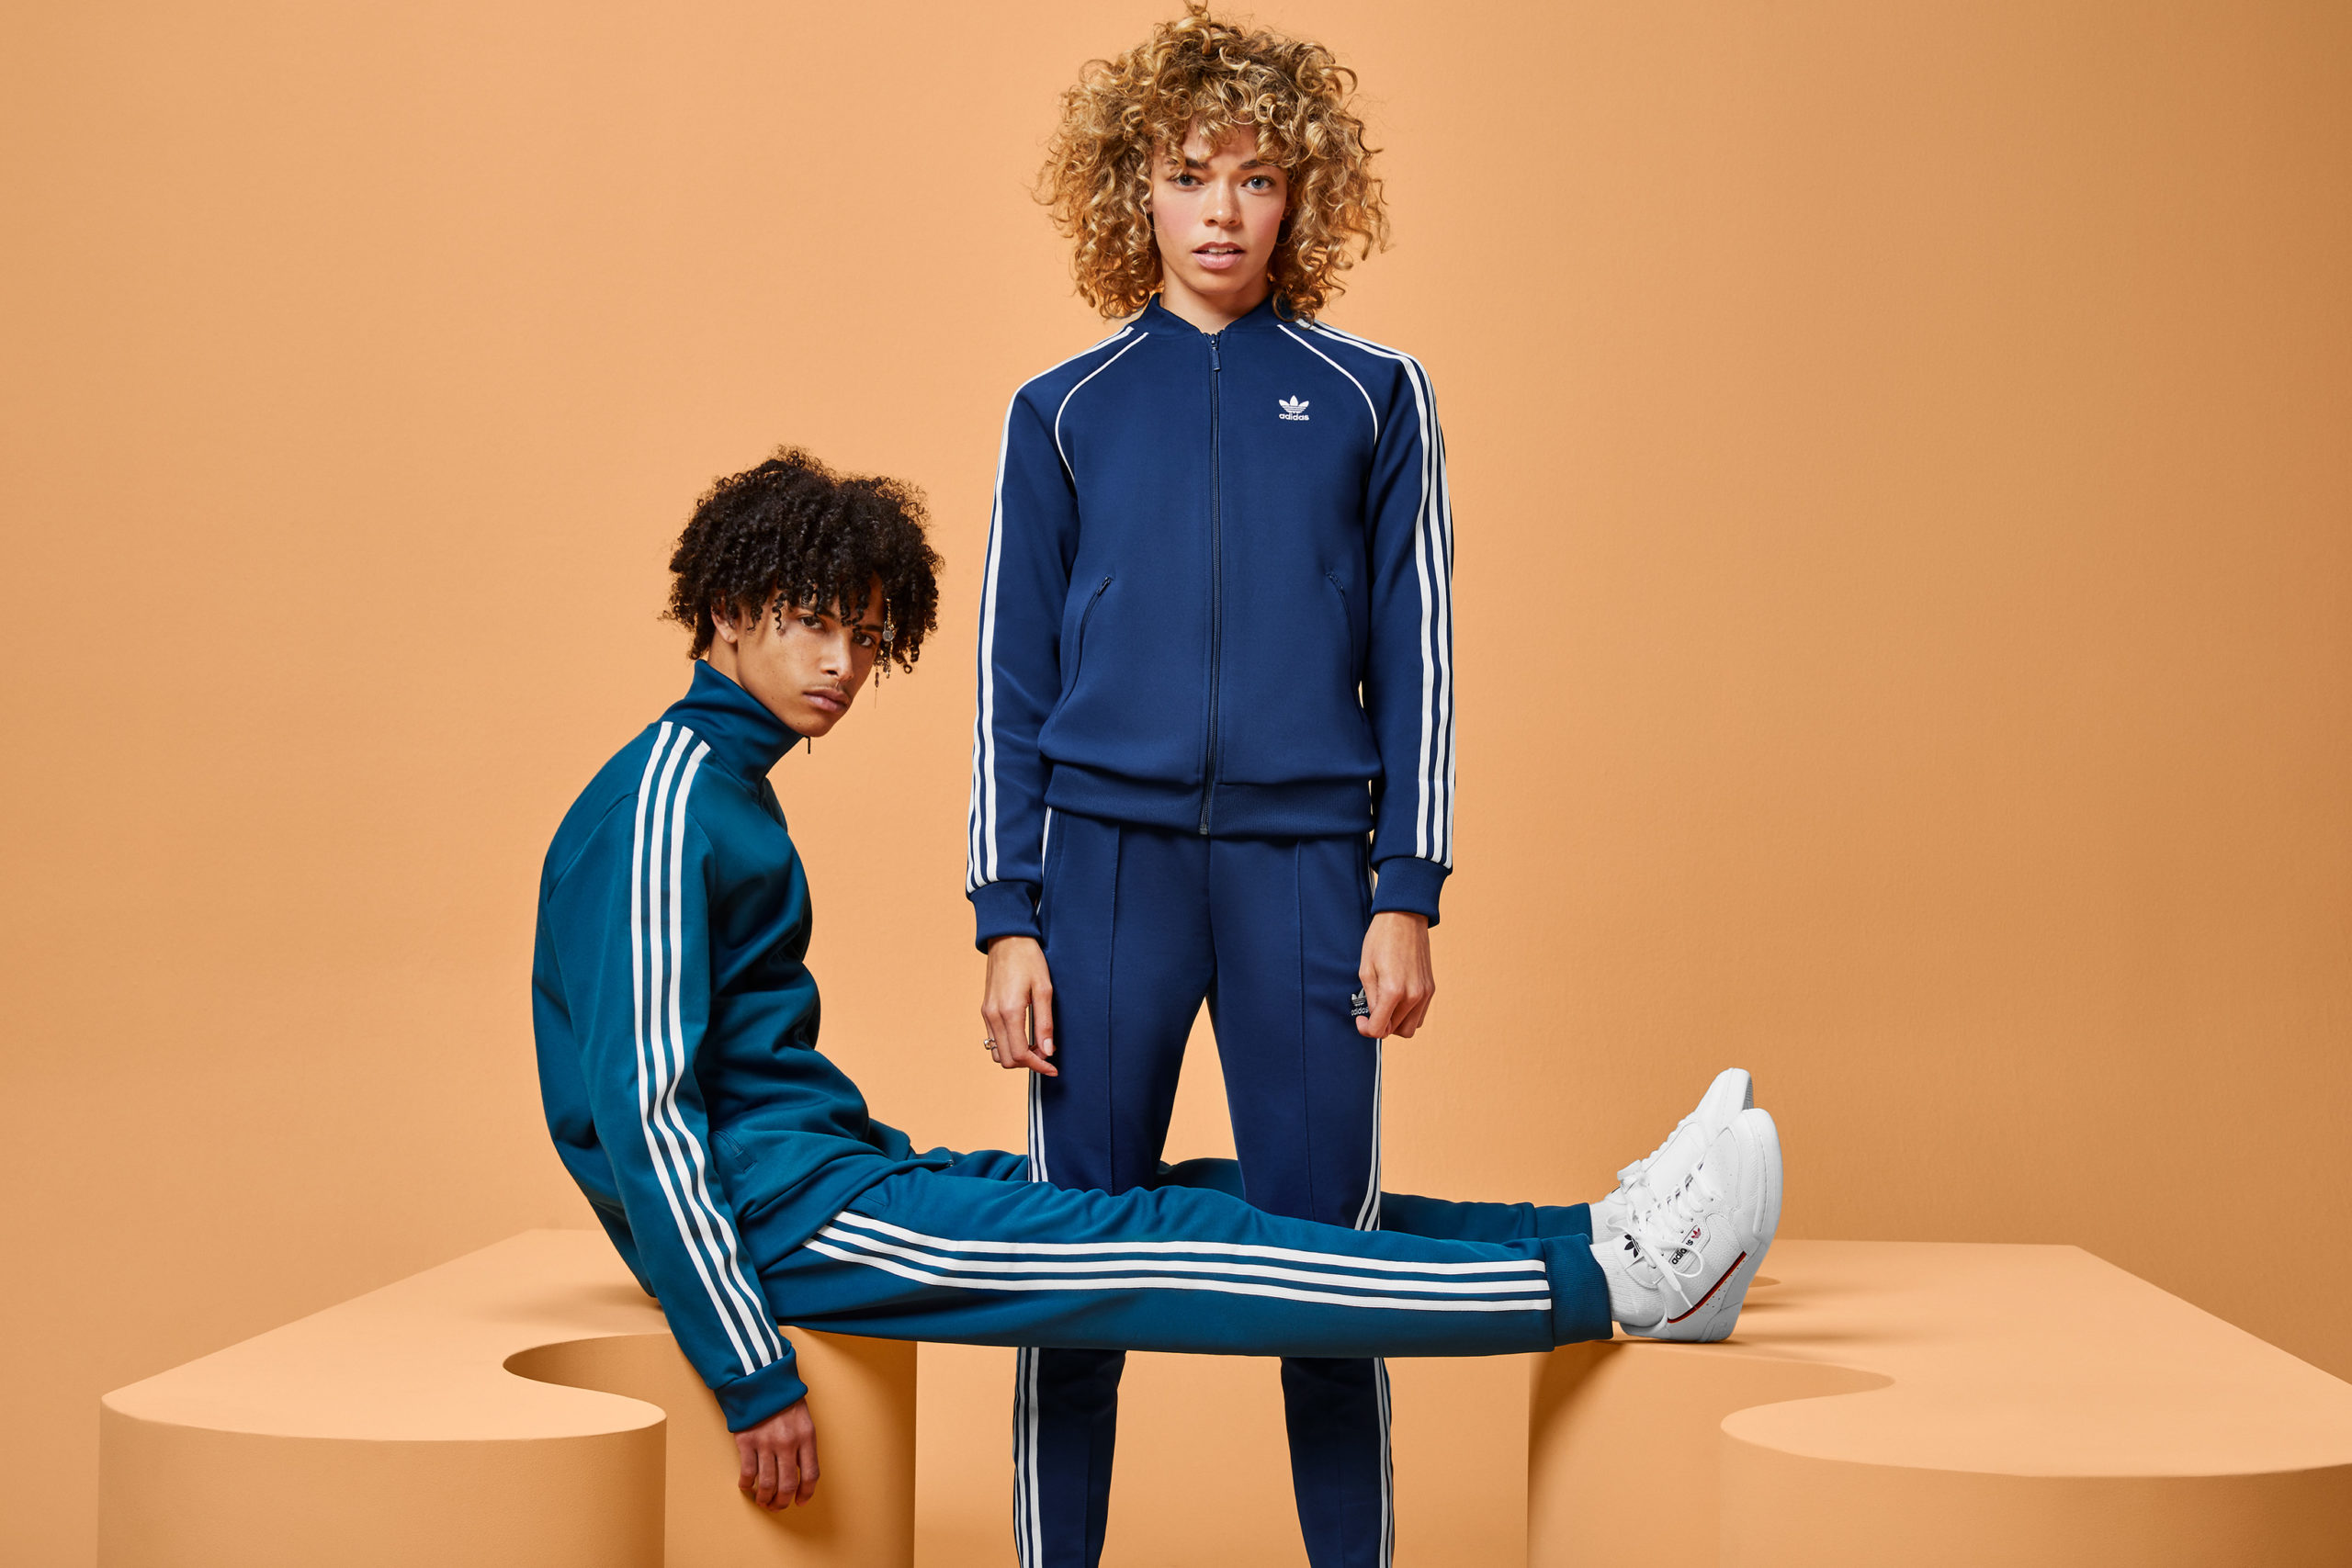 A woman wearing a blue tracksuit stands between the legs of a guy, also wearing a blue tracksuit, who’s sitting on a wavy modular shape with legs propped up on another wavy shape. Both shapes and the background are an orange-tan.